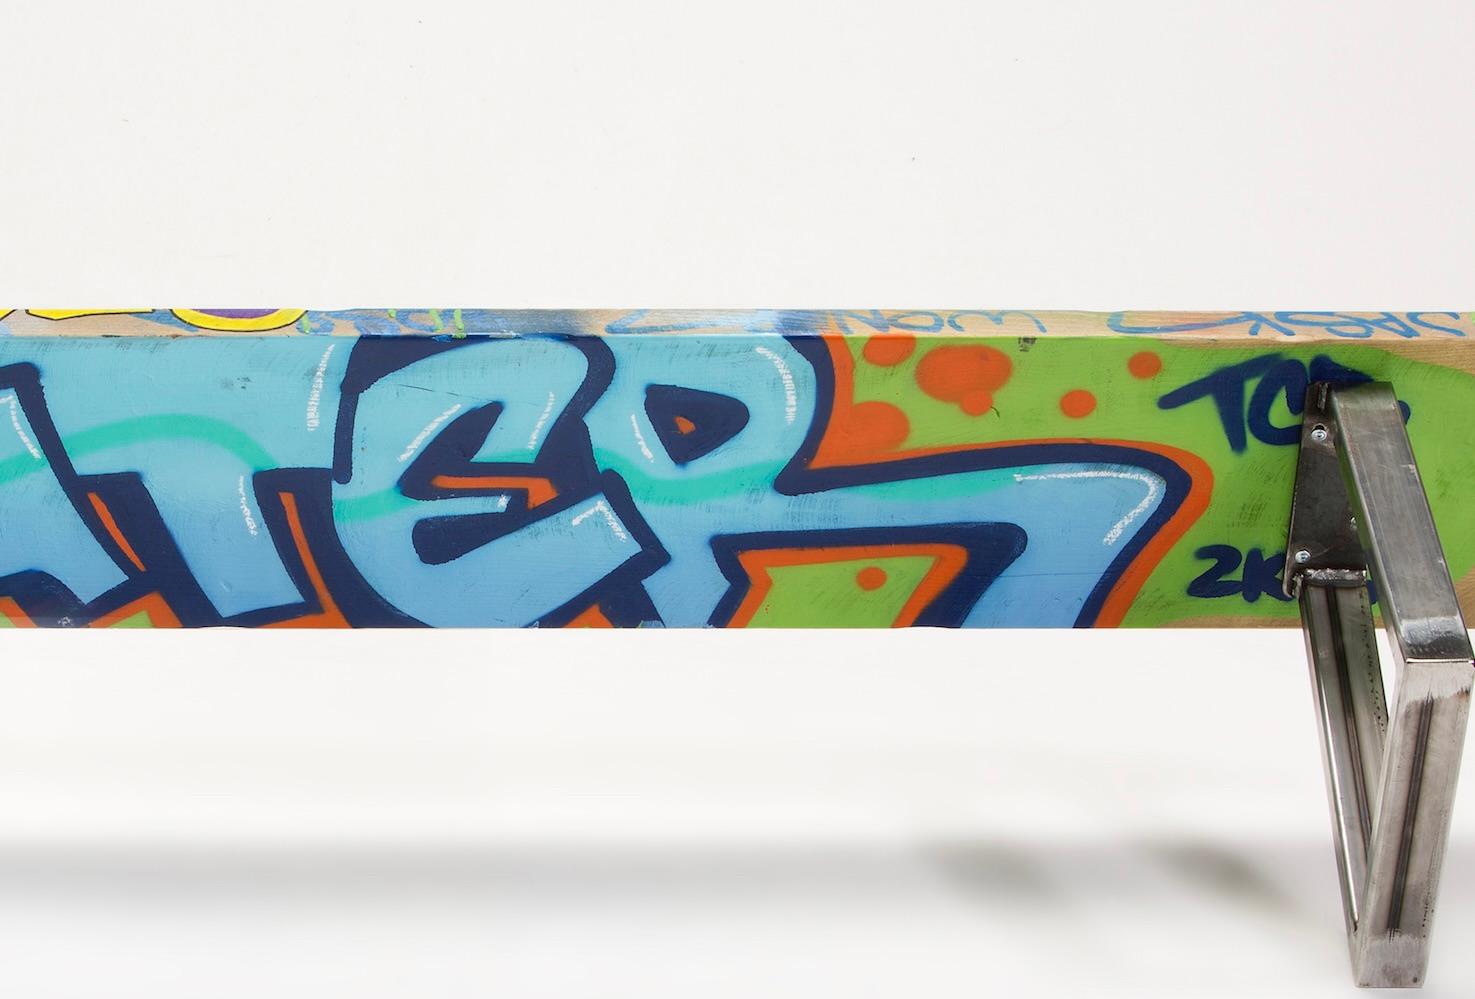 Steel Large Colorful Graffiti Tagged Wood Bench For Sale